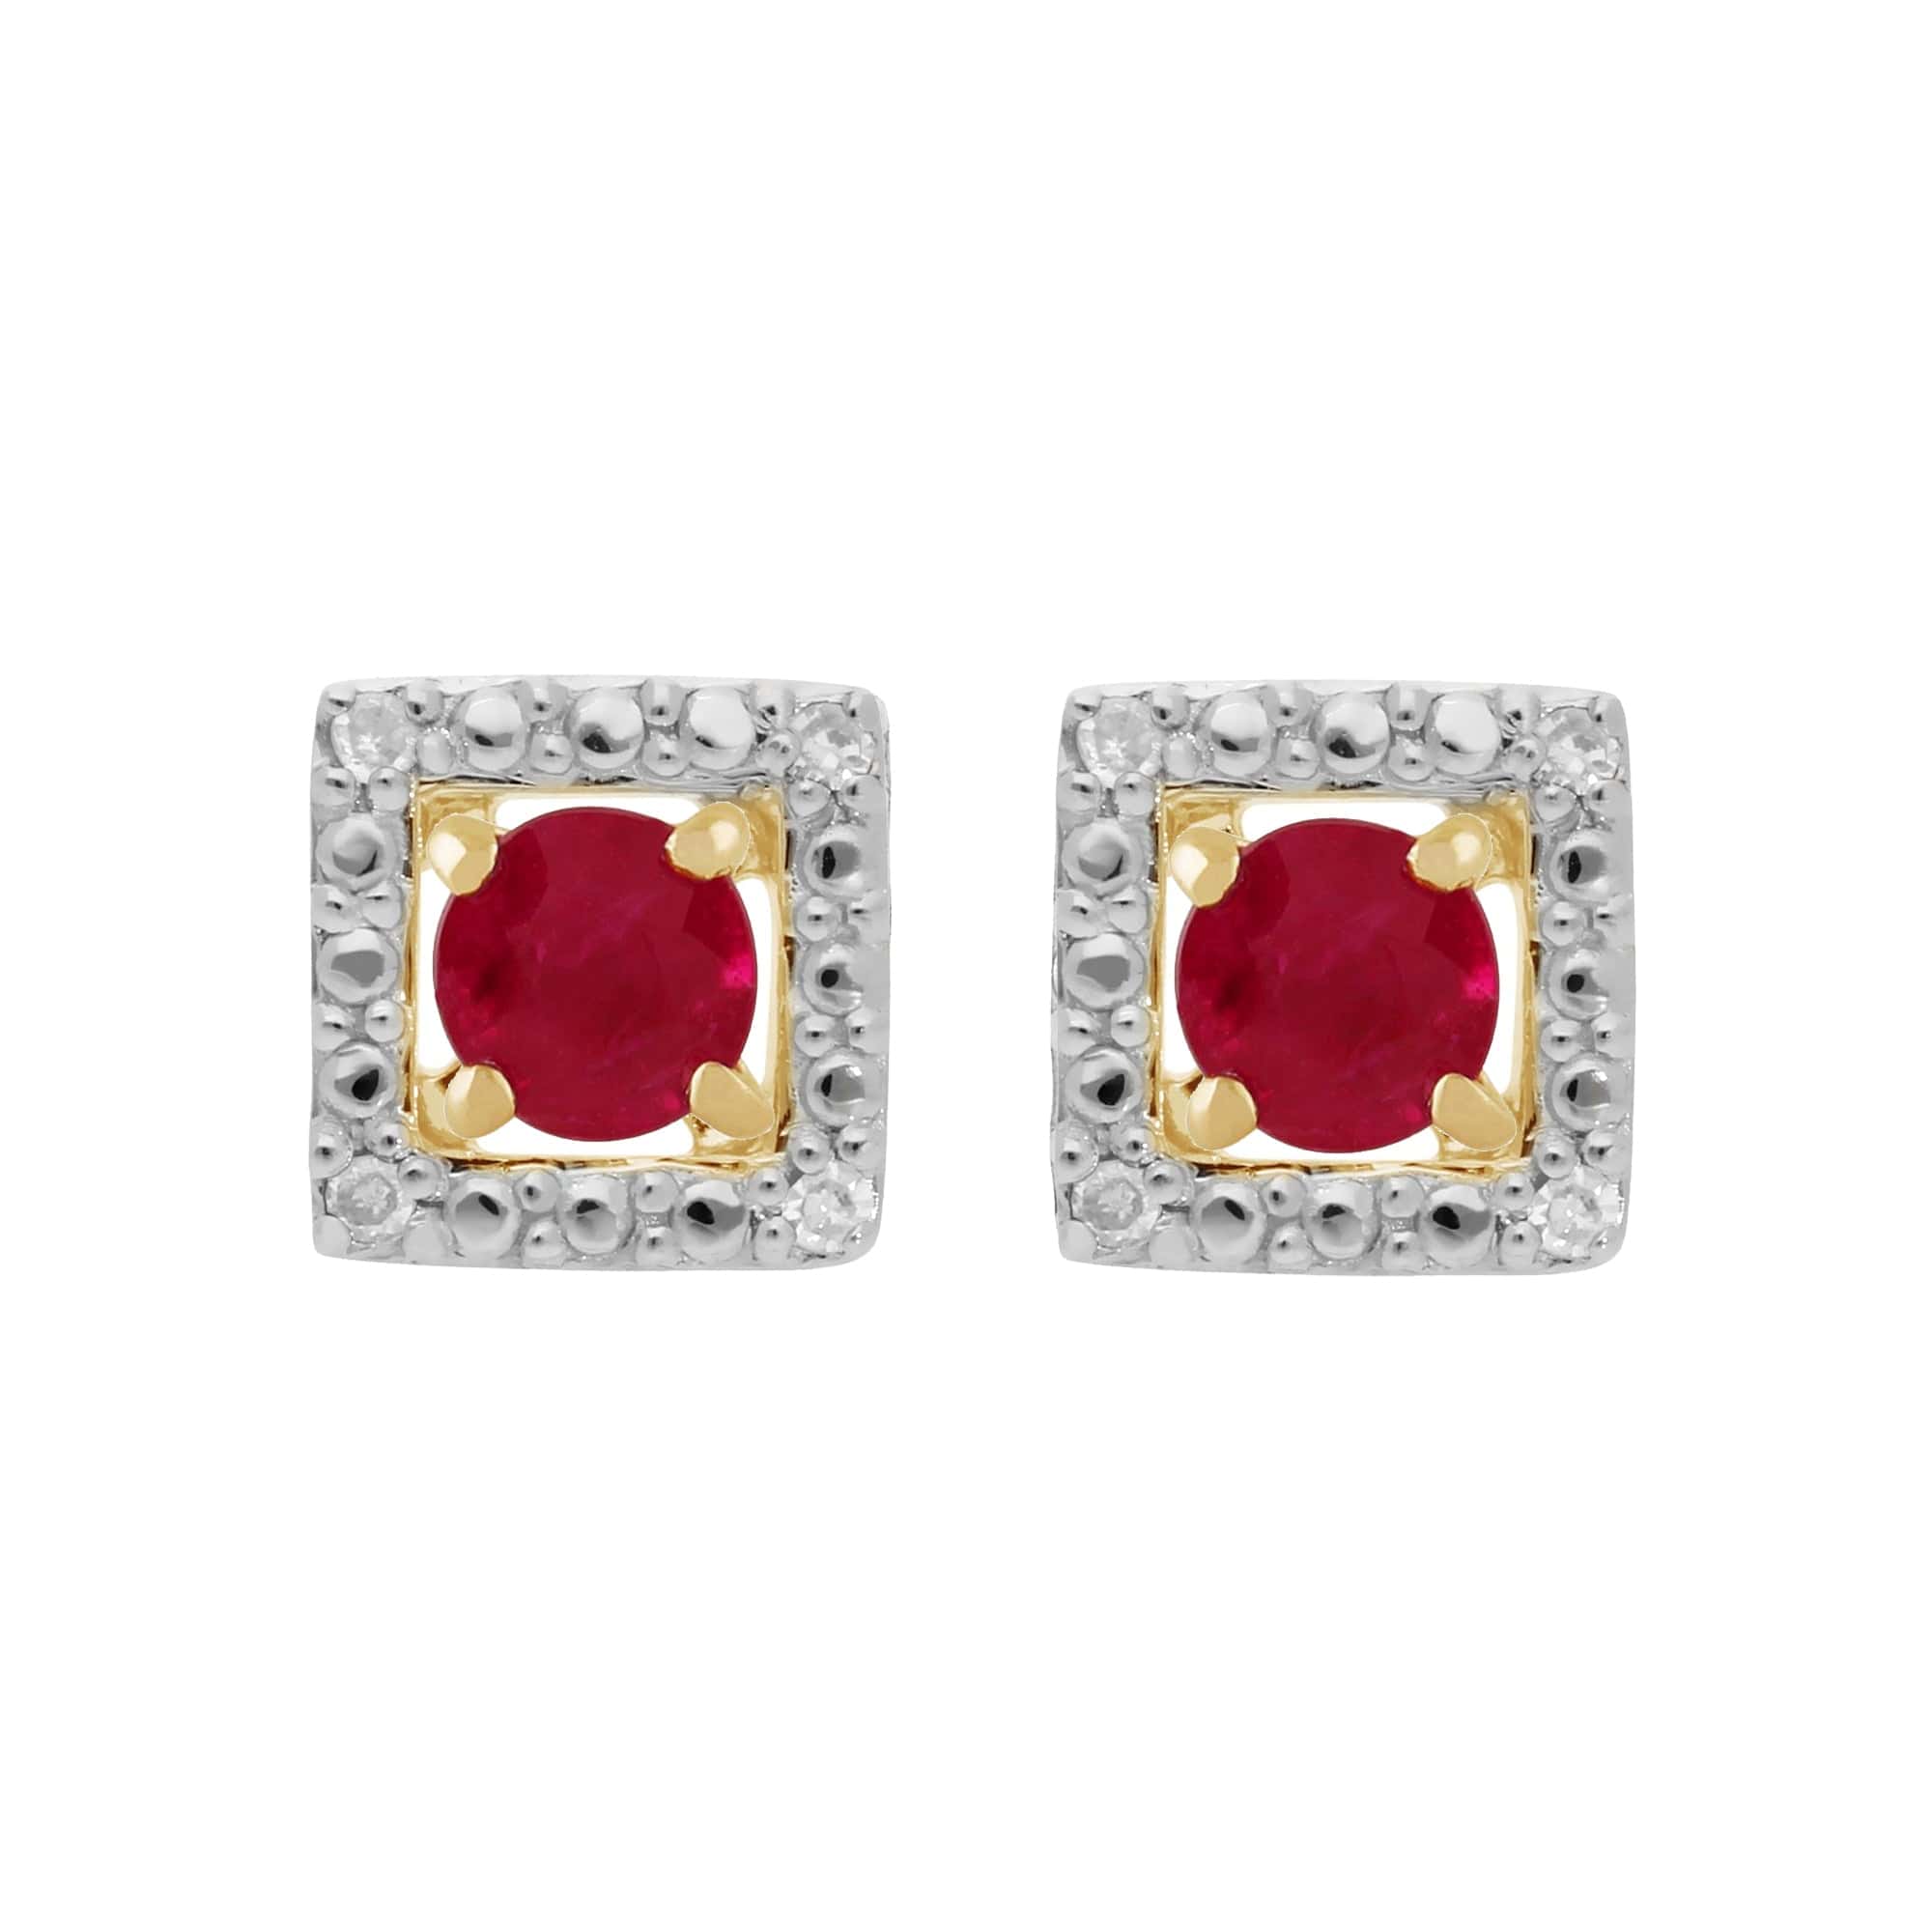 11570-191E0379019 Classic Round Ruby Stud Earrings with Detachable Diamond Square Earrings Jacket Set in 9ct Yellow Gold 1